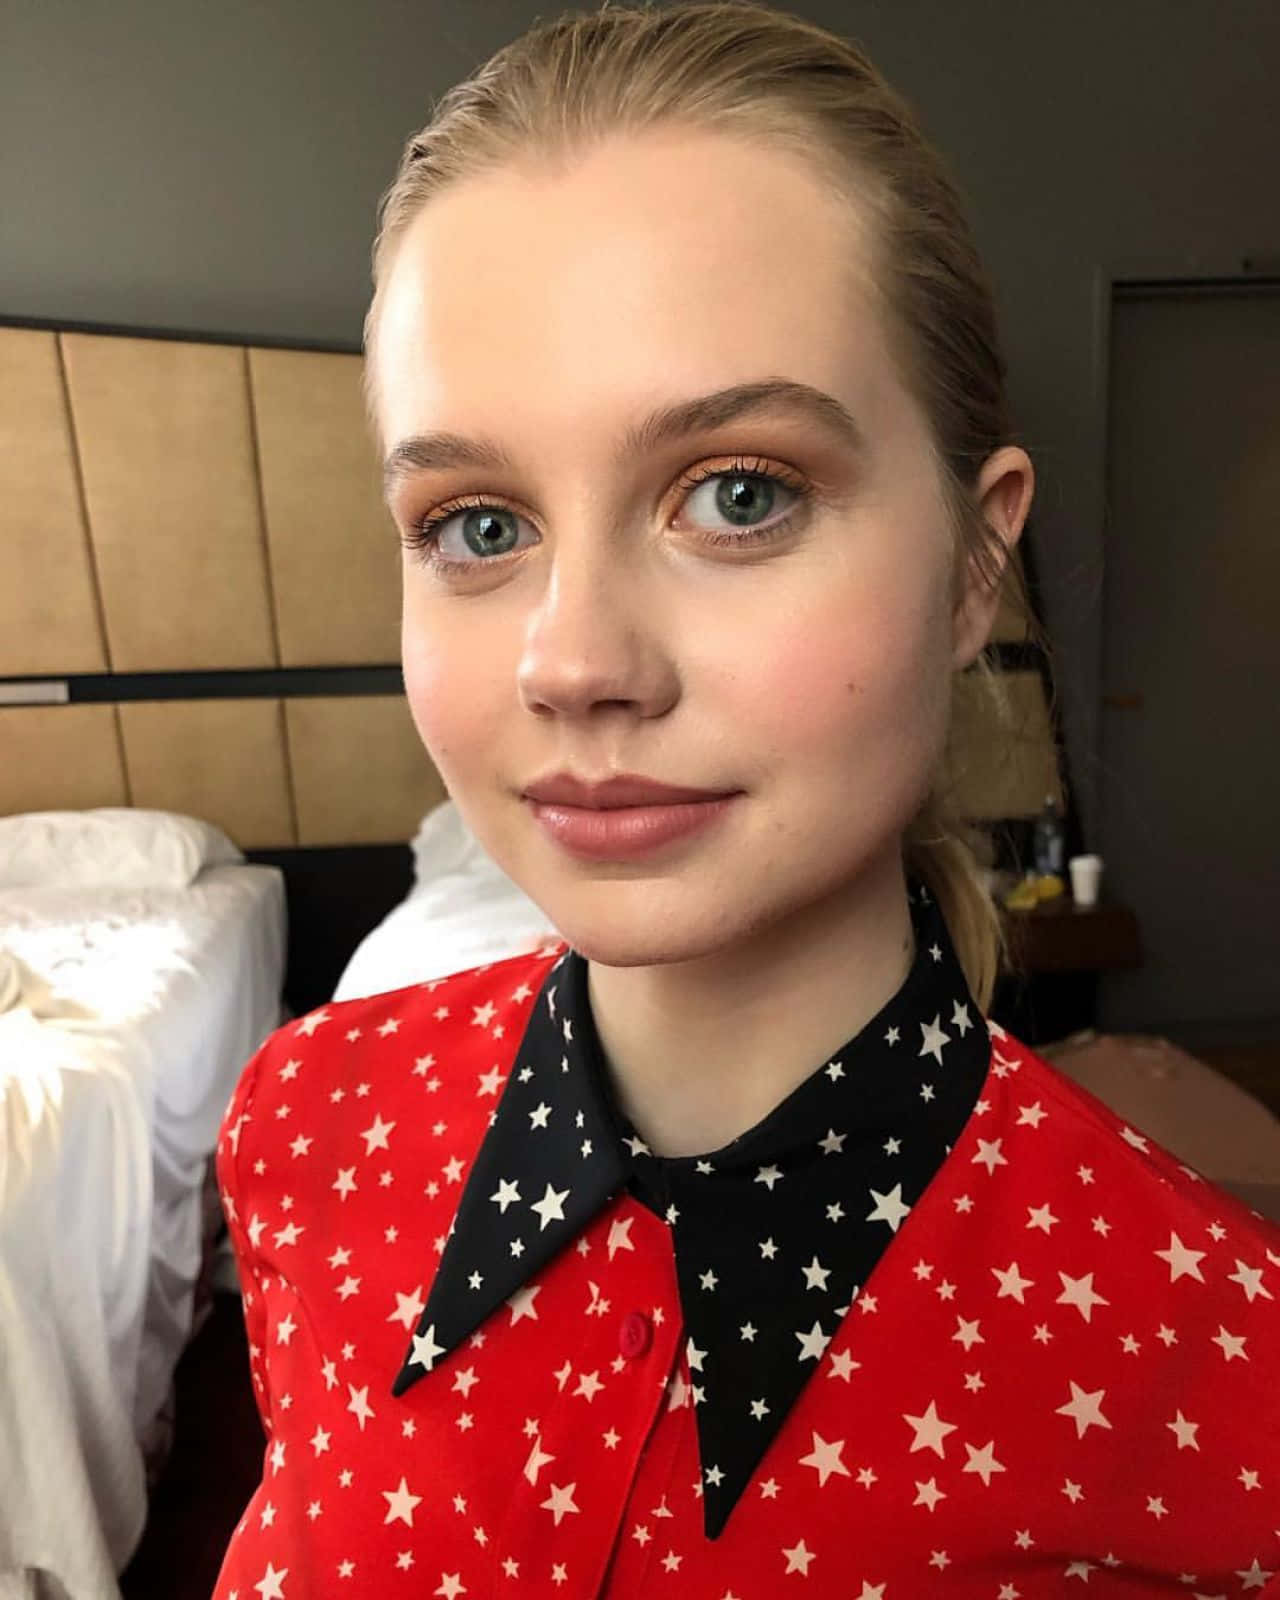 Angourie Rice Red Star Shirt Wallpaper